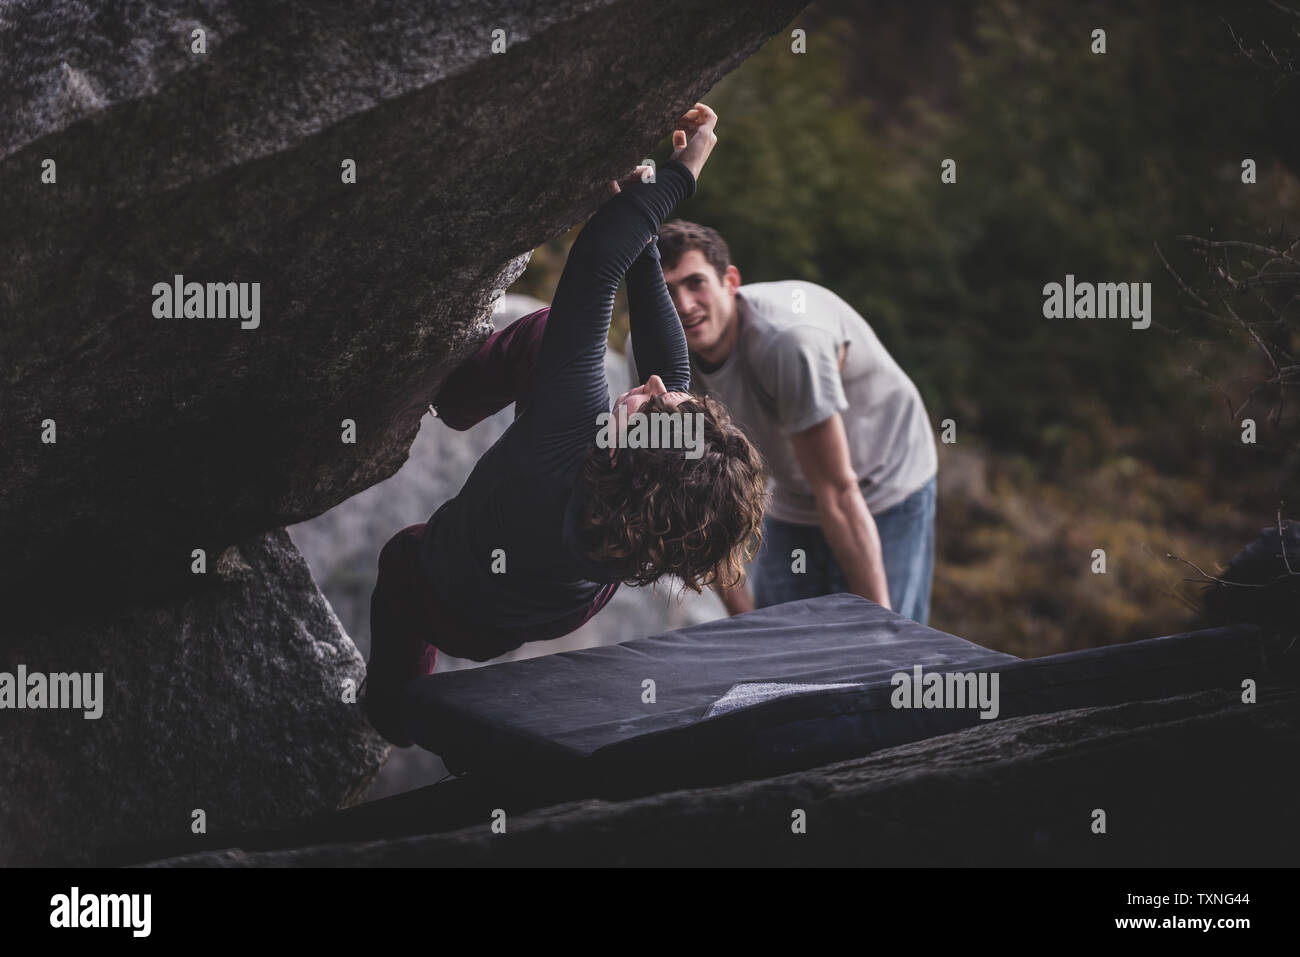 Climber bouldering, watched by friend, Squamish, Canada Stock Photo